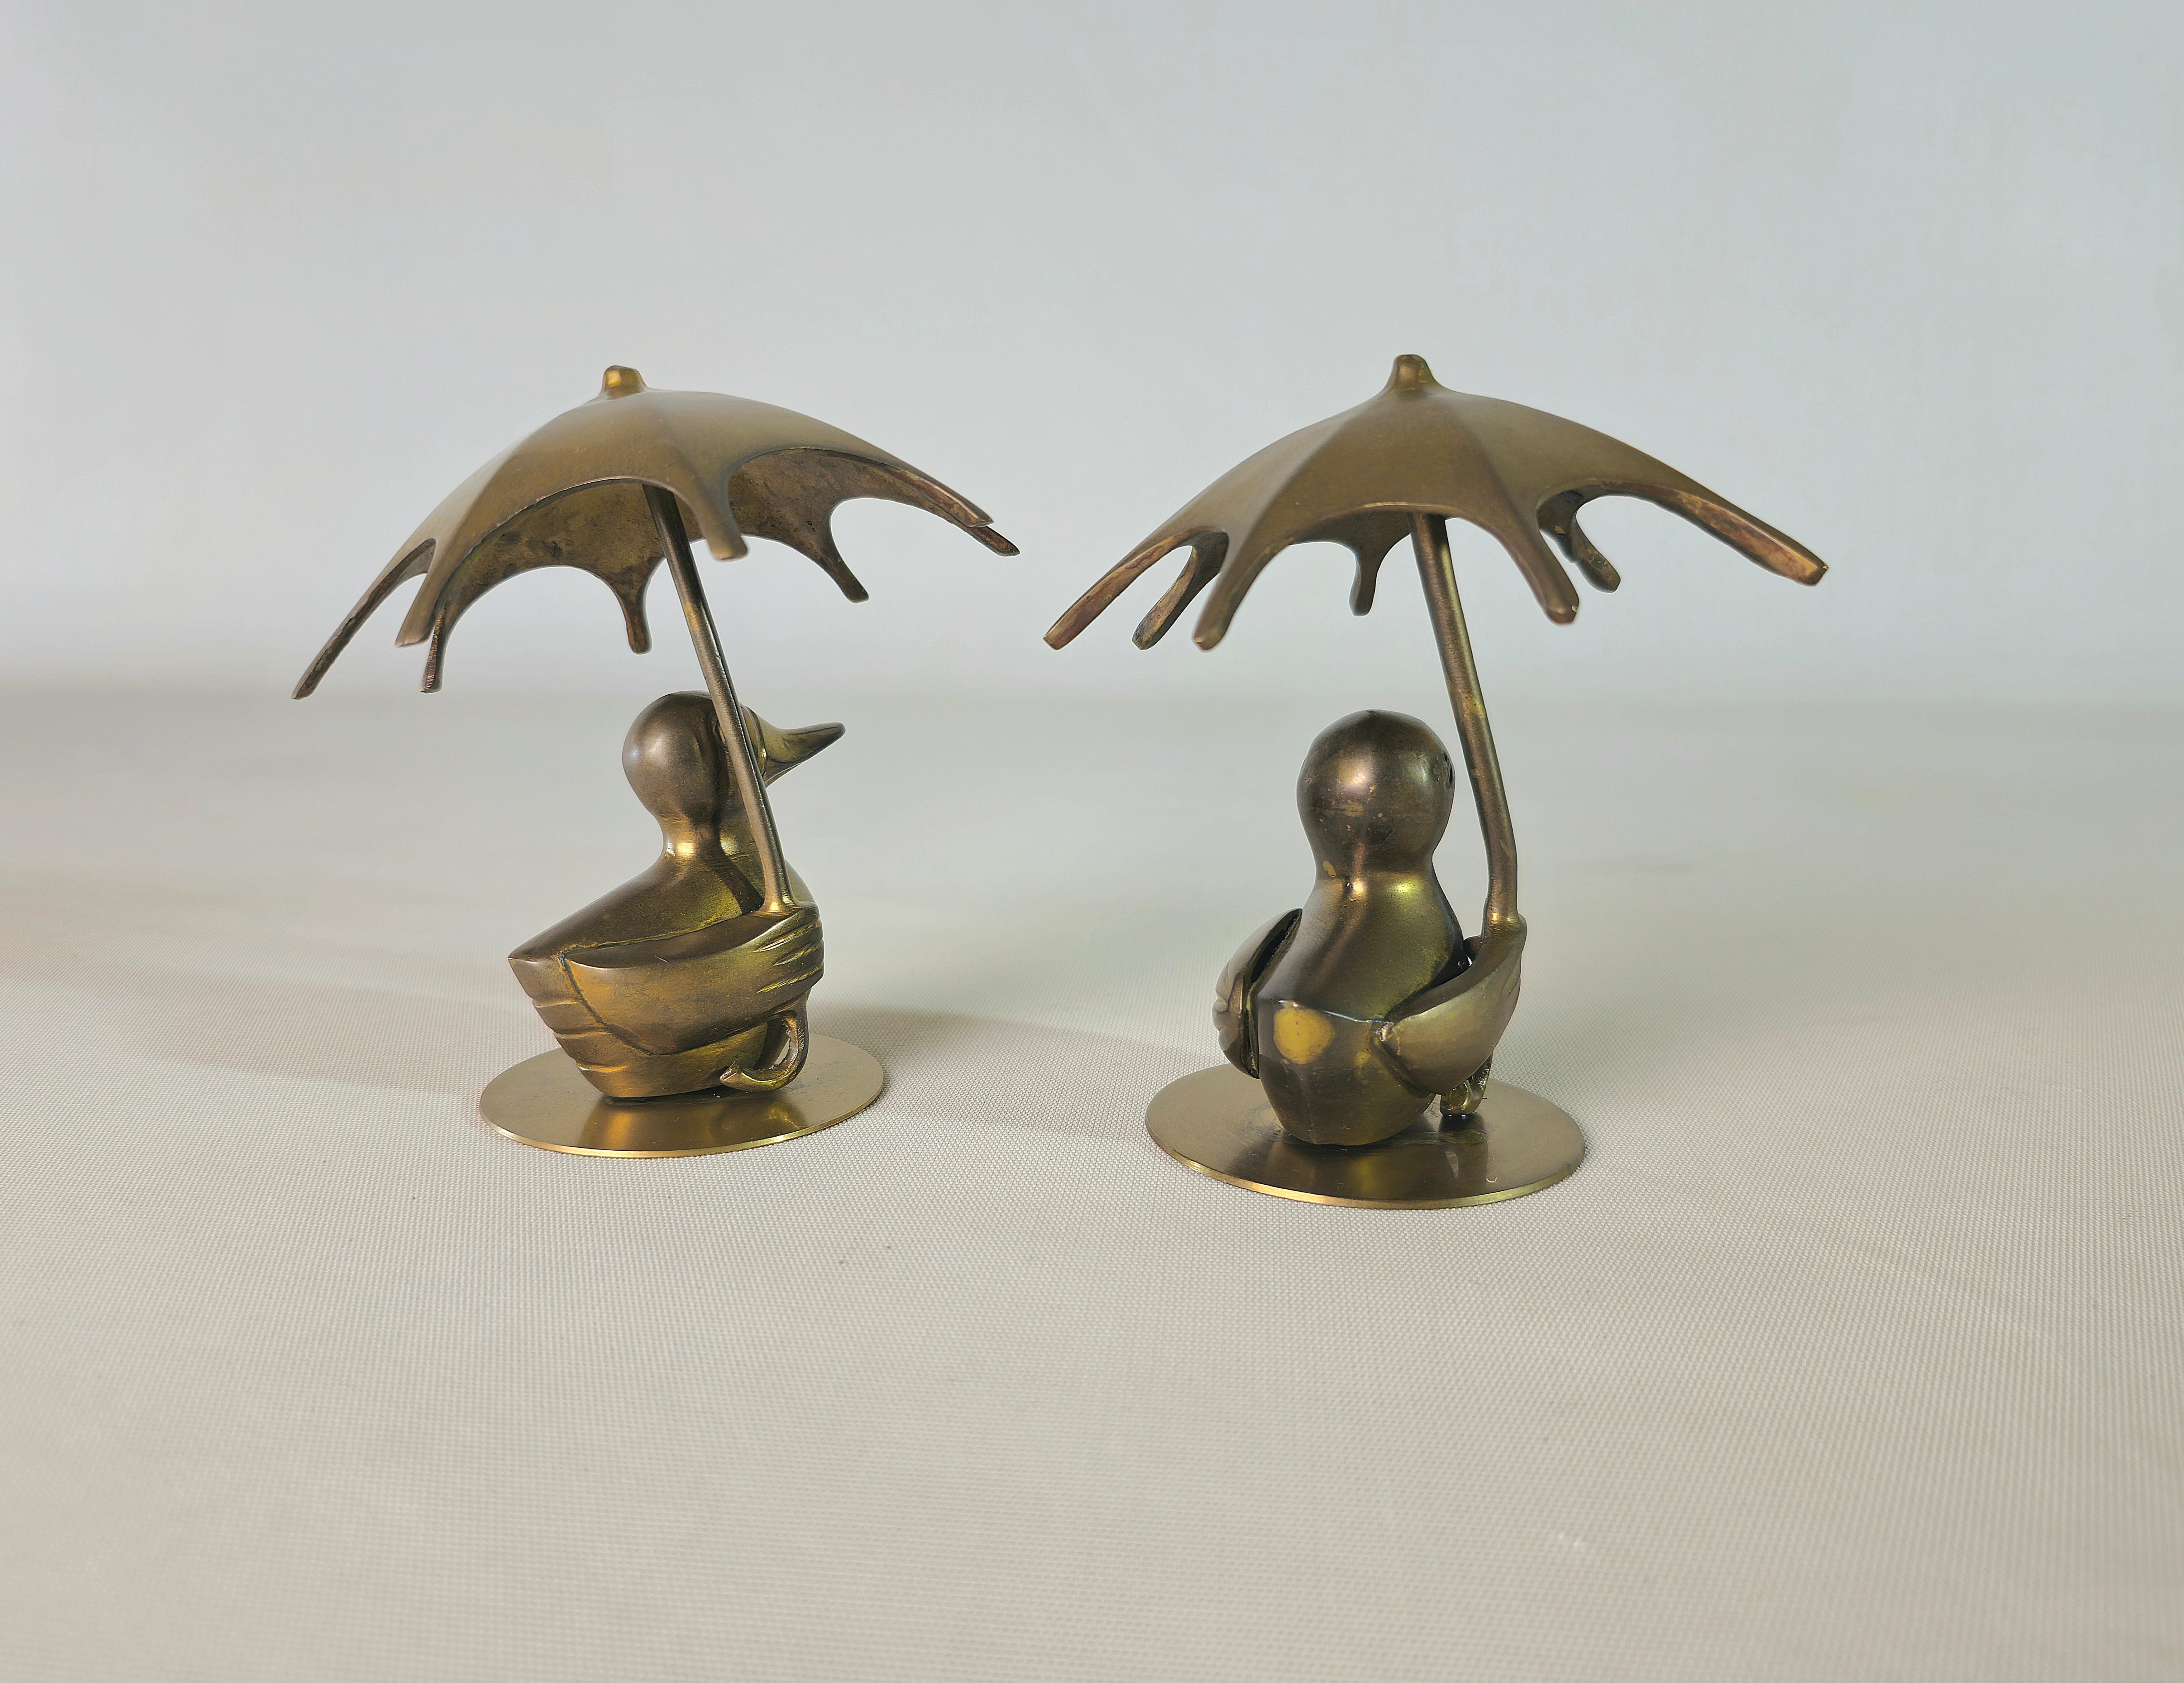 Nice ducks all made of brass that walk with umbrellas sheltering themselves from the rain or the sun.

Note: We try to offer our customers an excellent service even in shipments all over the world, collaborating with one of the best shipping